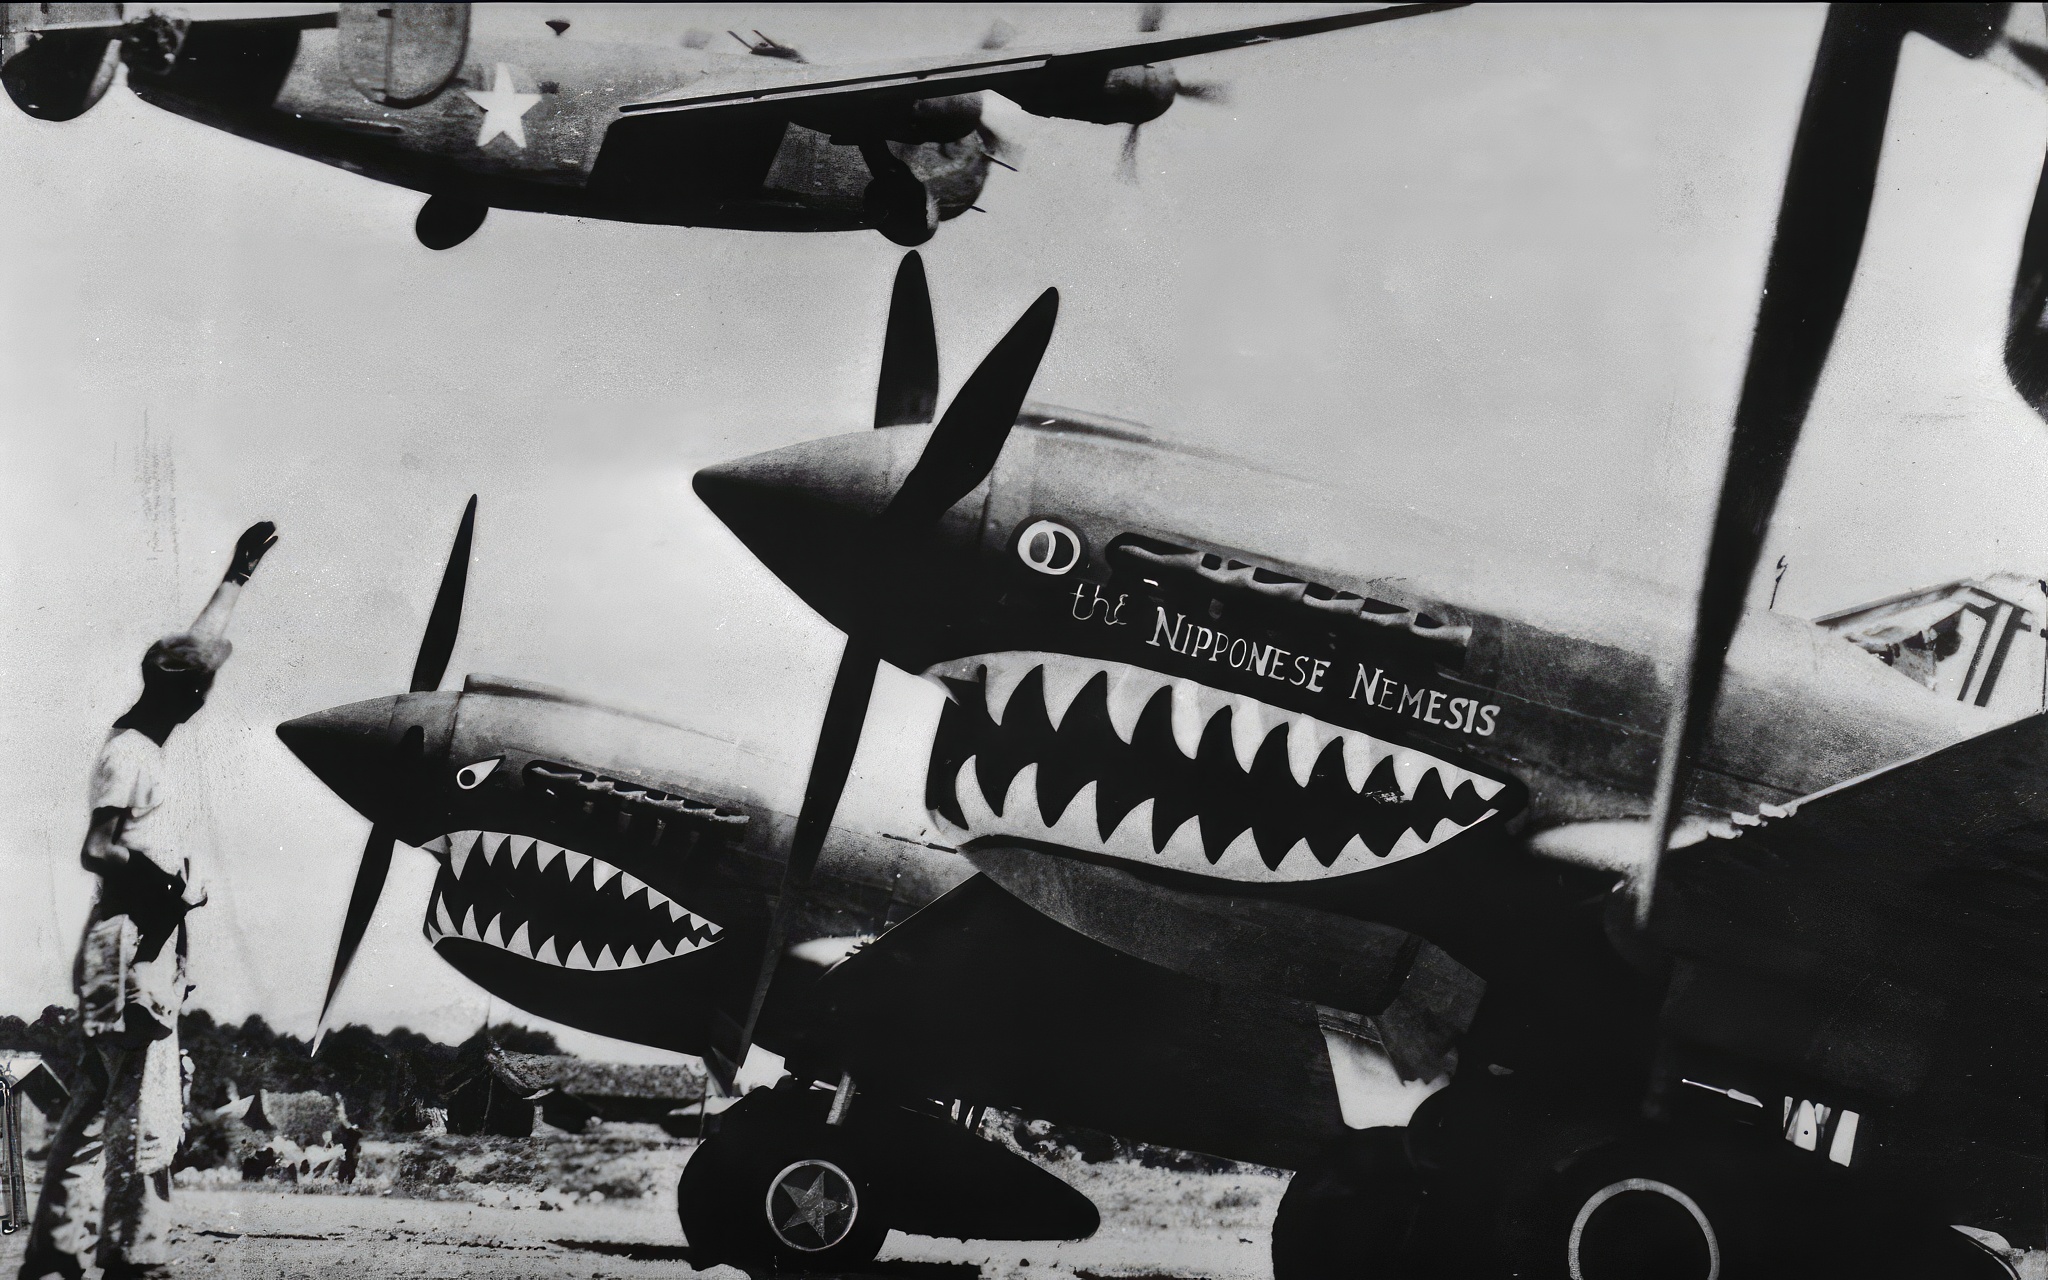 Aircraft of the "Flying Tigers" P-40 warhawks